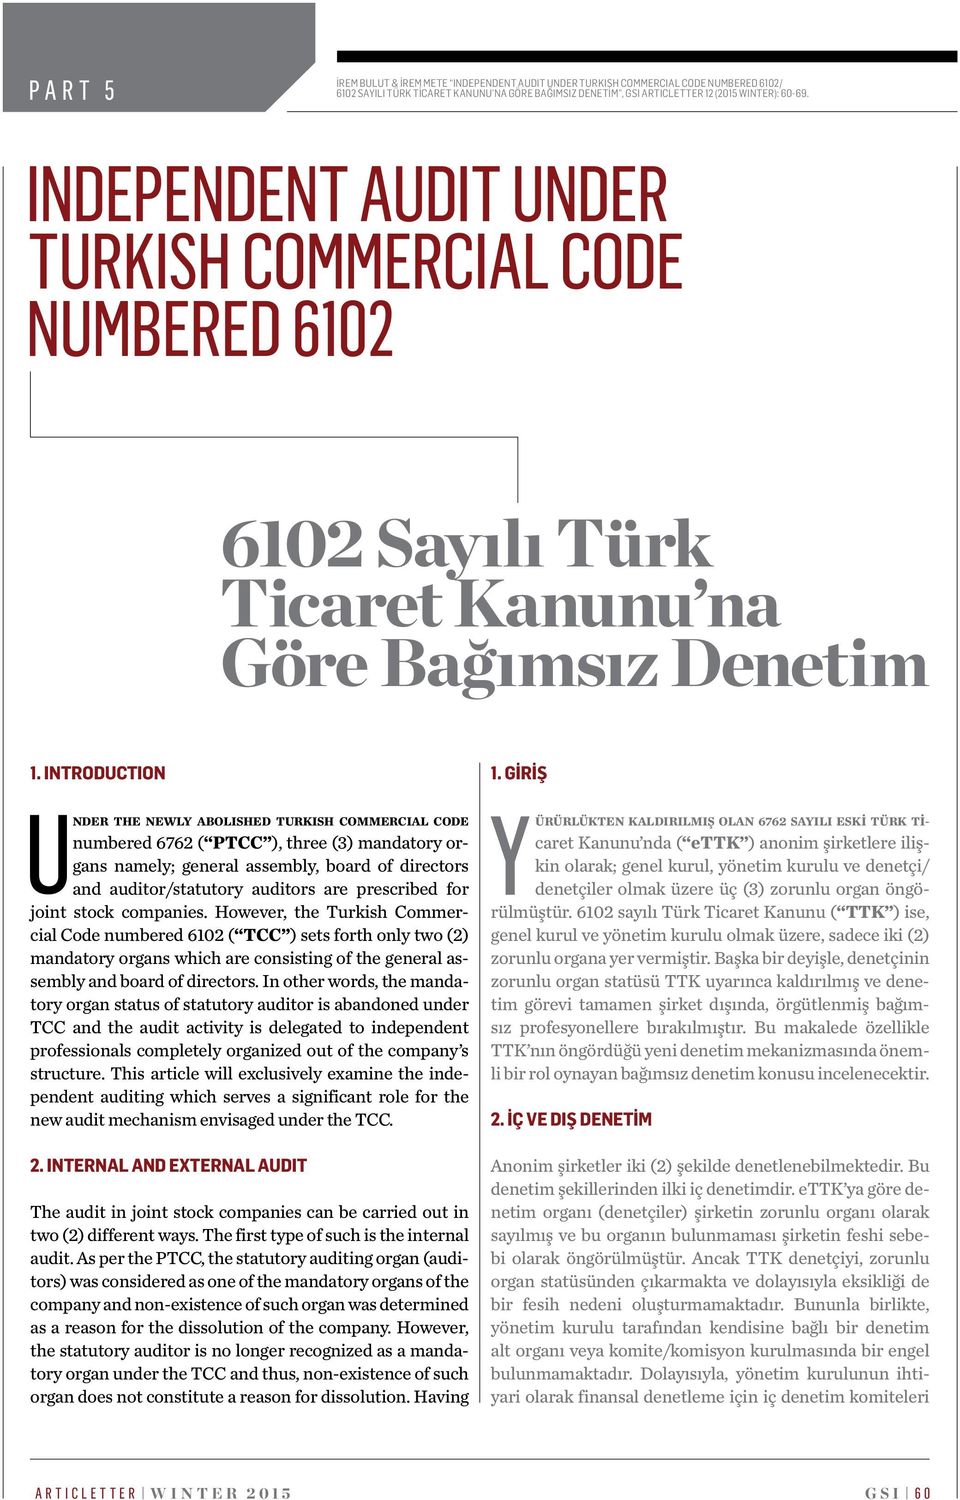 INTRODUCTION nder the newly abolished Turkish Commercial Code numbered 6762 ( PTCC ), three (3) mandatory organs namely; general assembly, board of directors and auditor/statutory auditors are